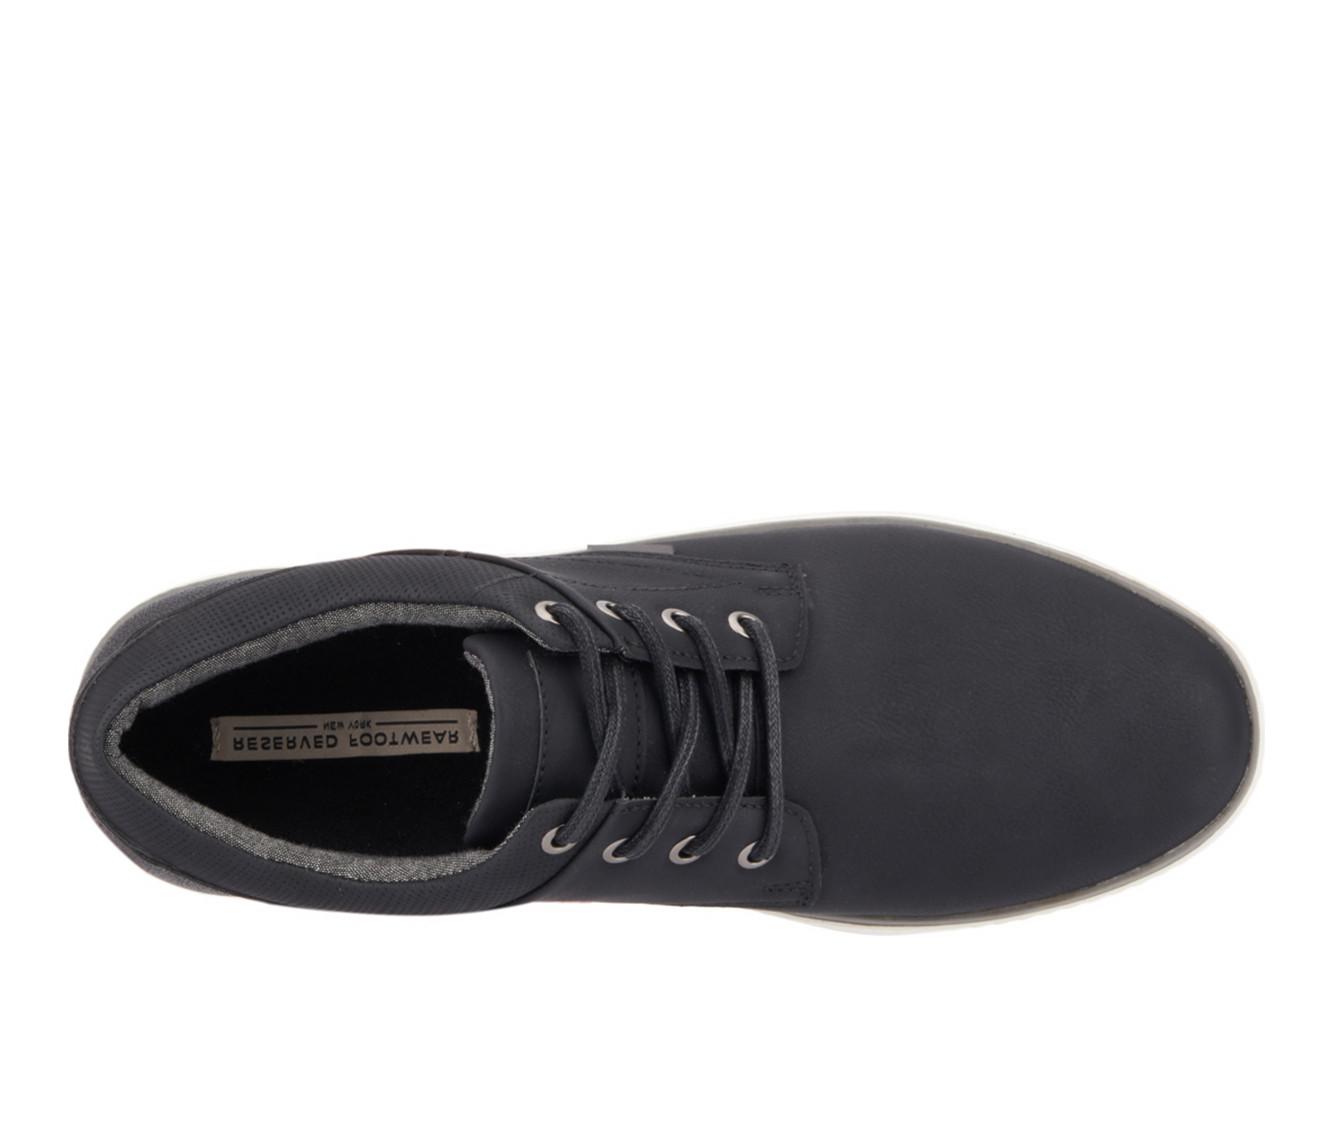 Men's Reserved Footwear Leo Casual Oxfords